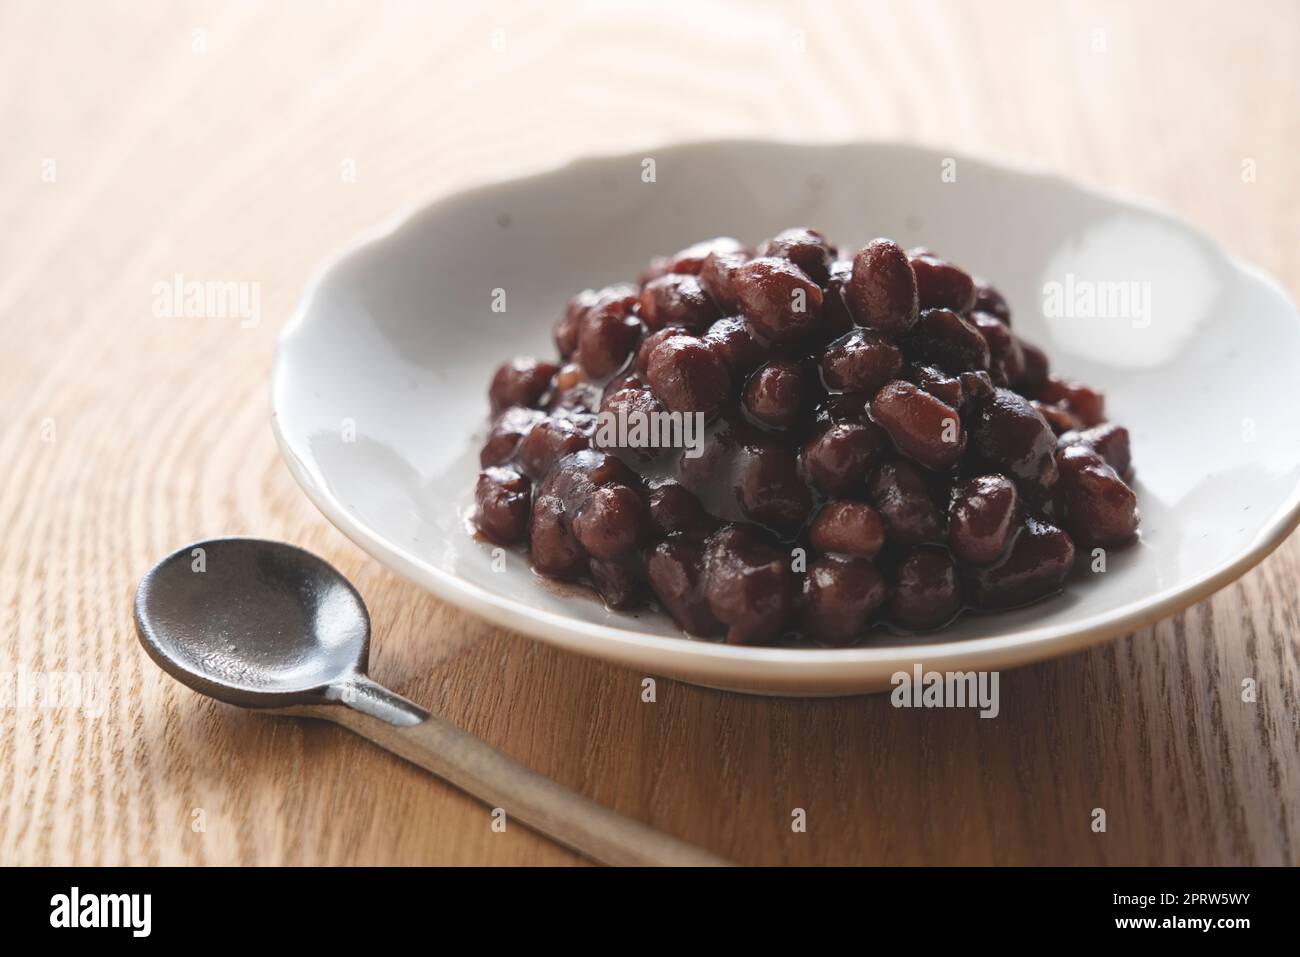 Boiled azuki beans placed against a wooden background. Stock Photo